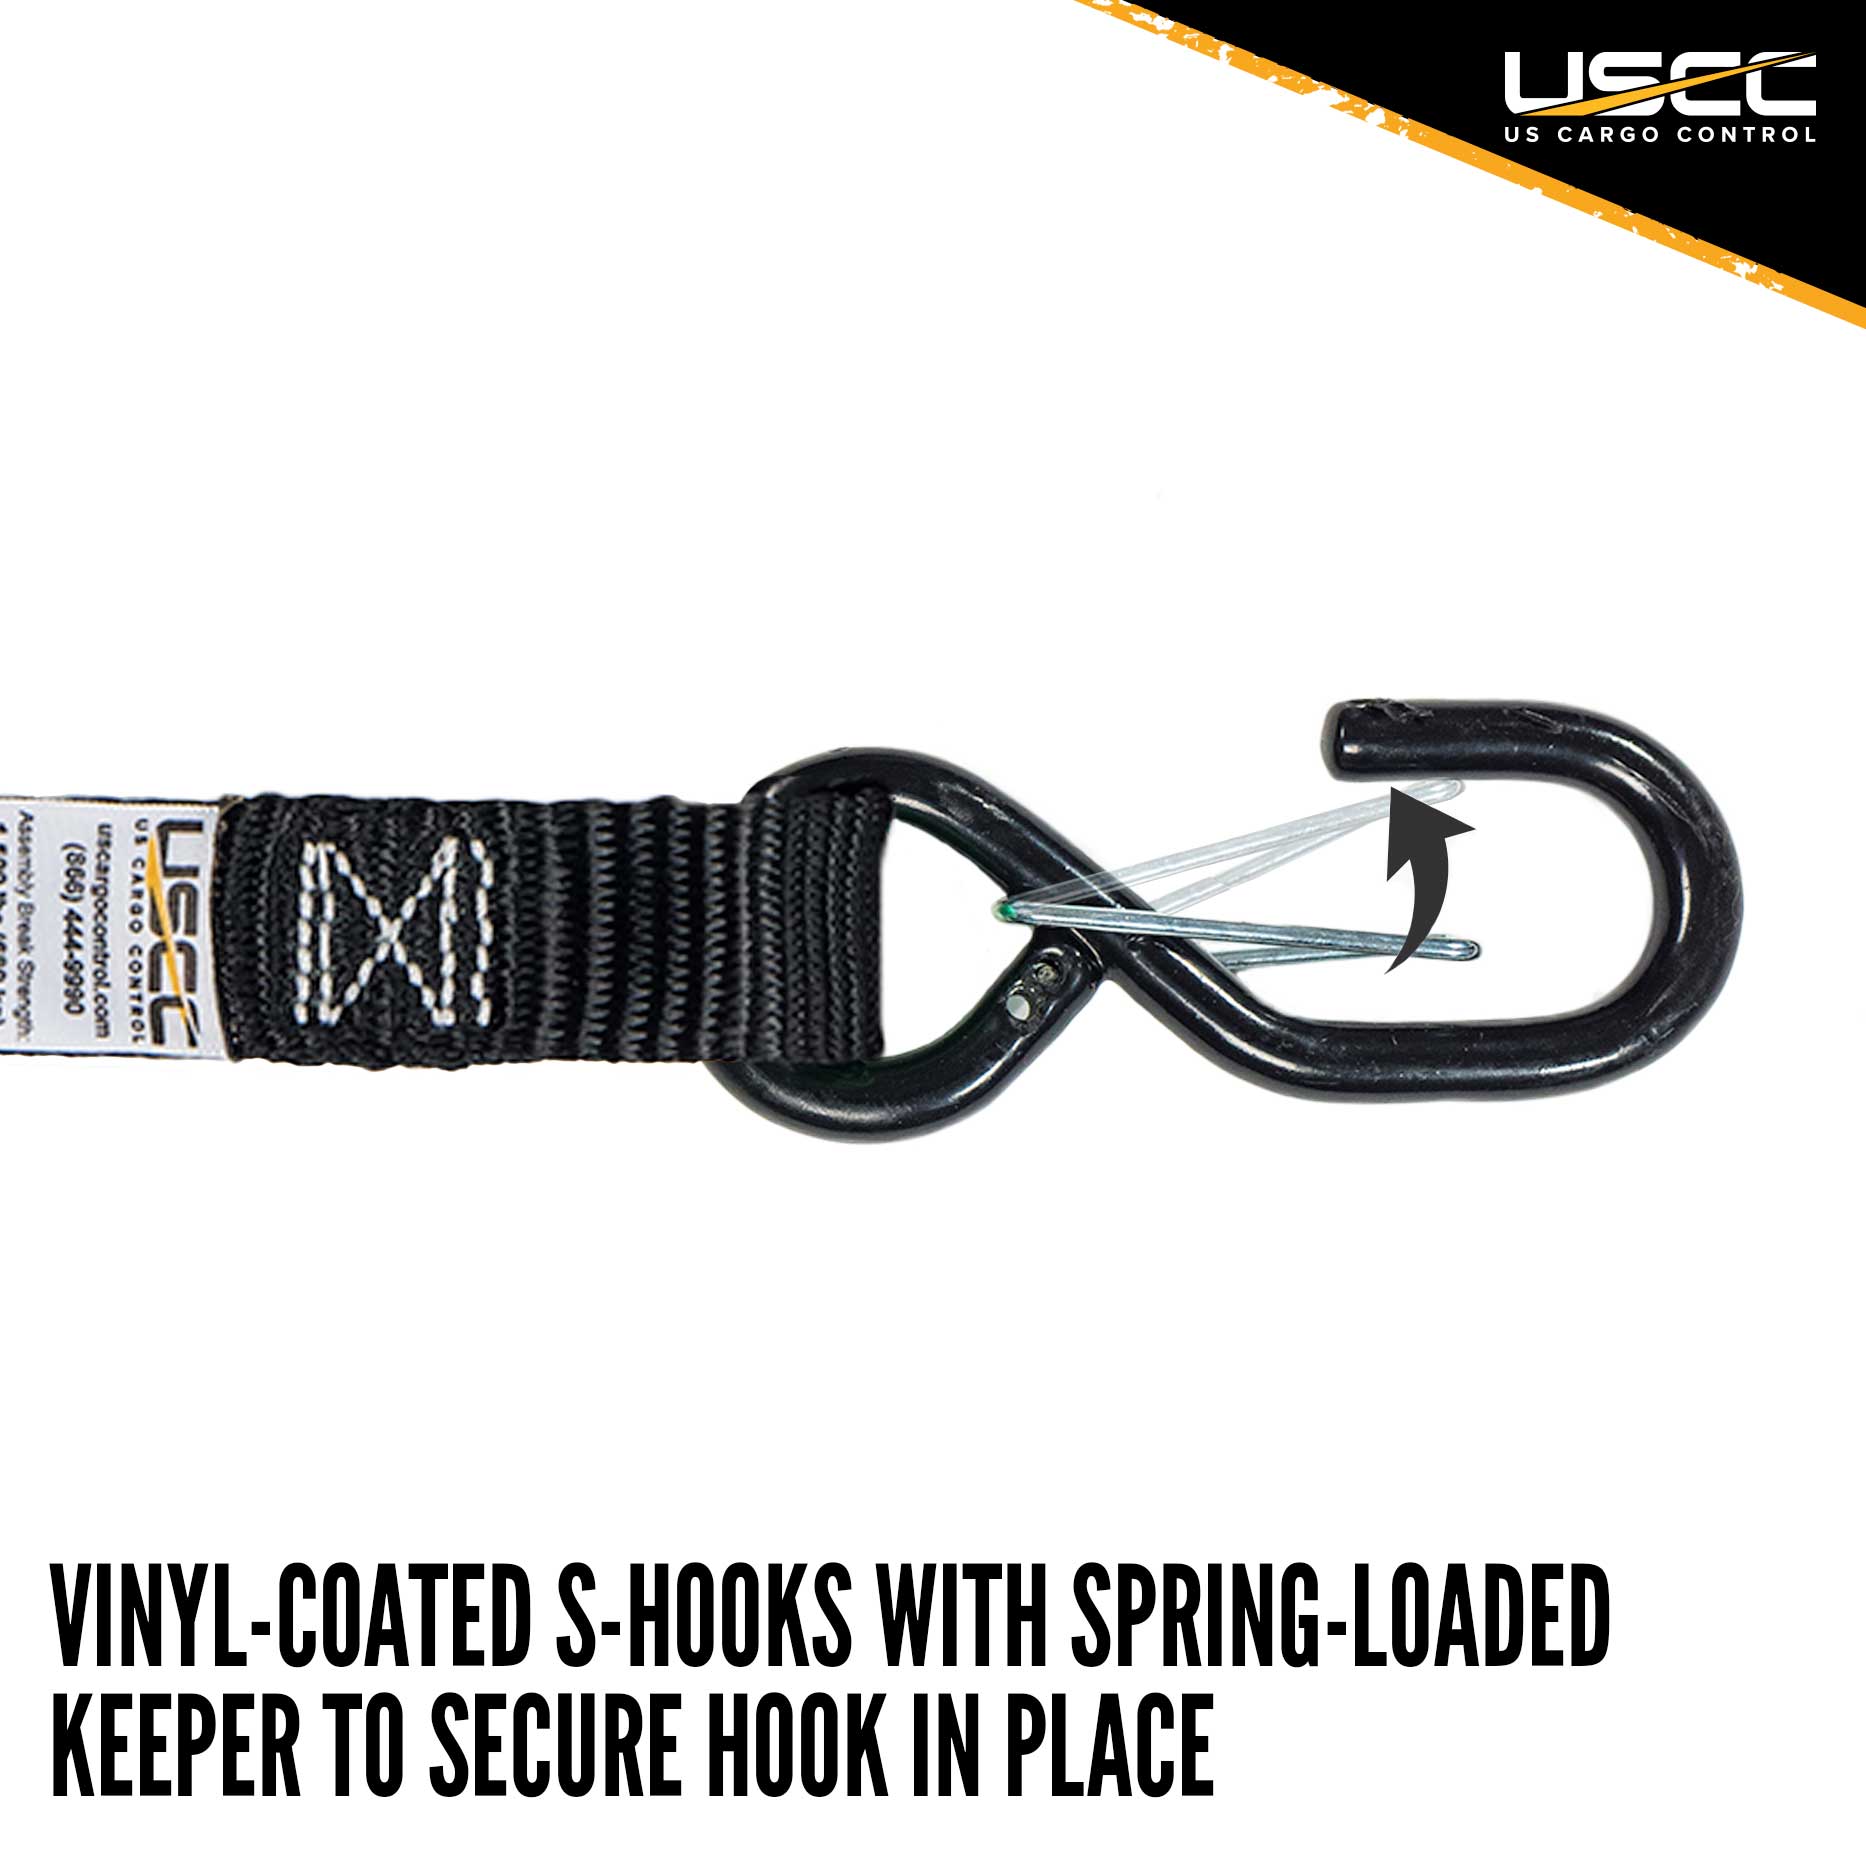 1-Inch Motorcycle Ratchet Strap with Vinyl-Coated S-Hooks with Keeper and Sewn-in Soft Tie